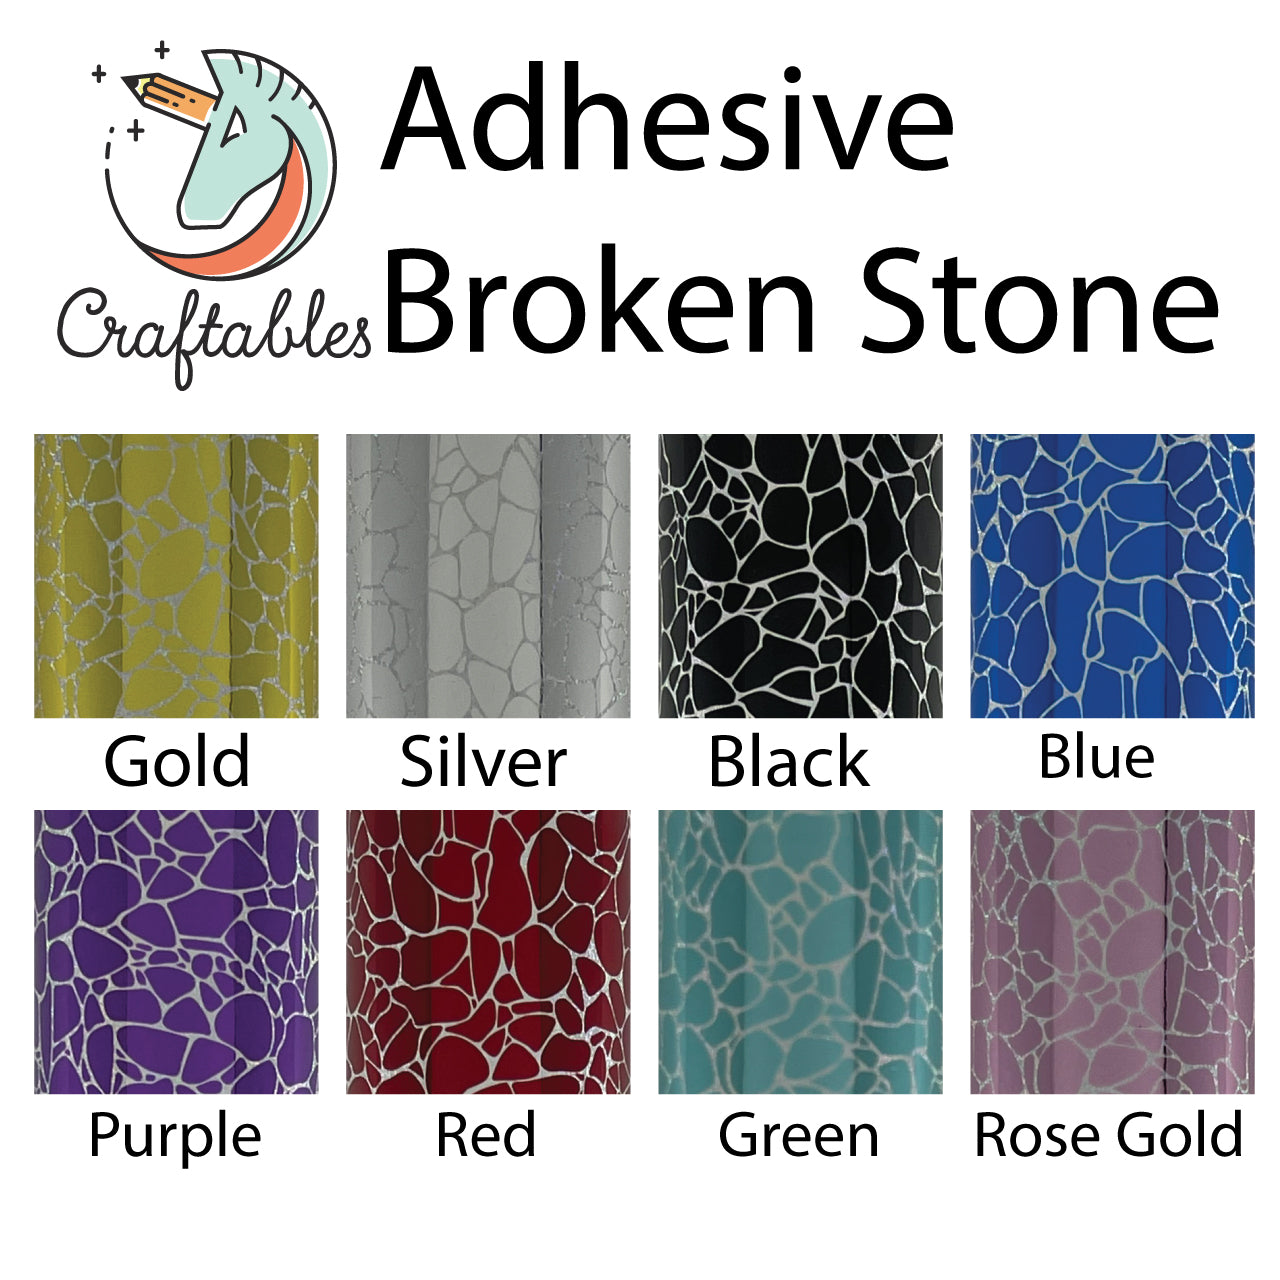 Blue Broken Stone Holographic Adhesive Vinyl Rolls By Craftables